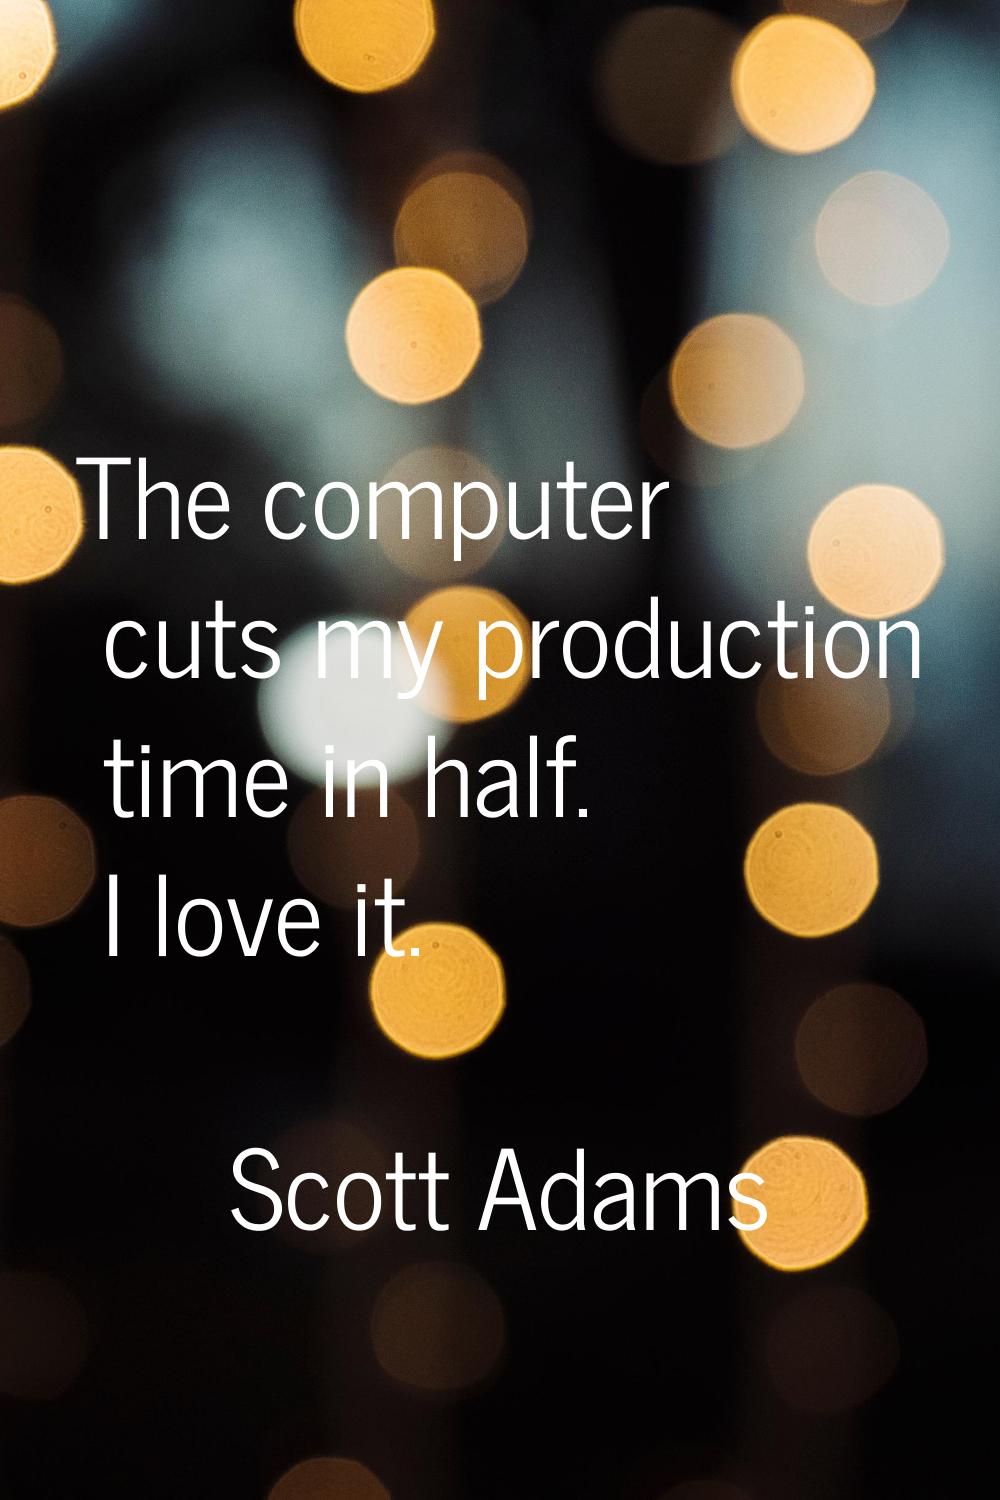 The computer cuts my production time in half. I love it.